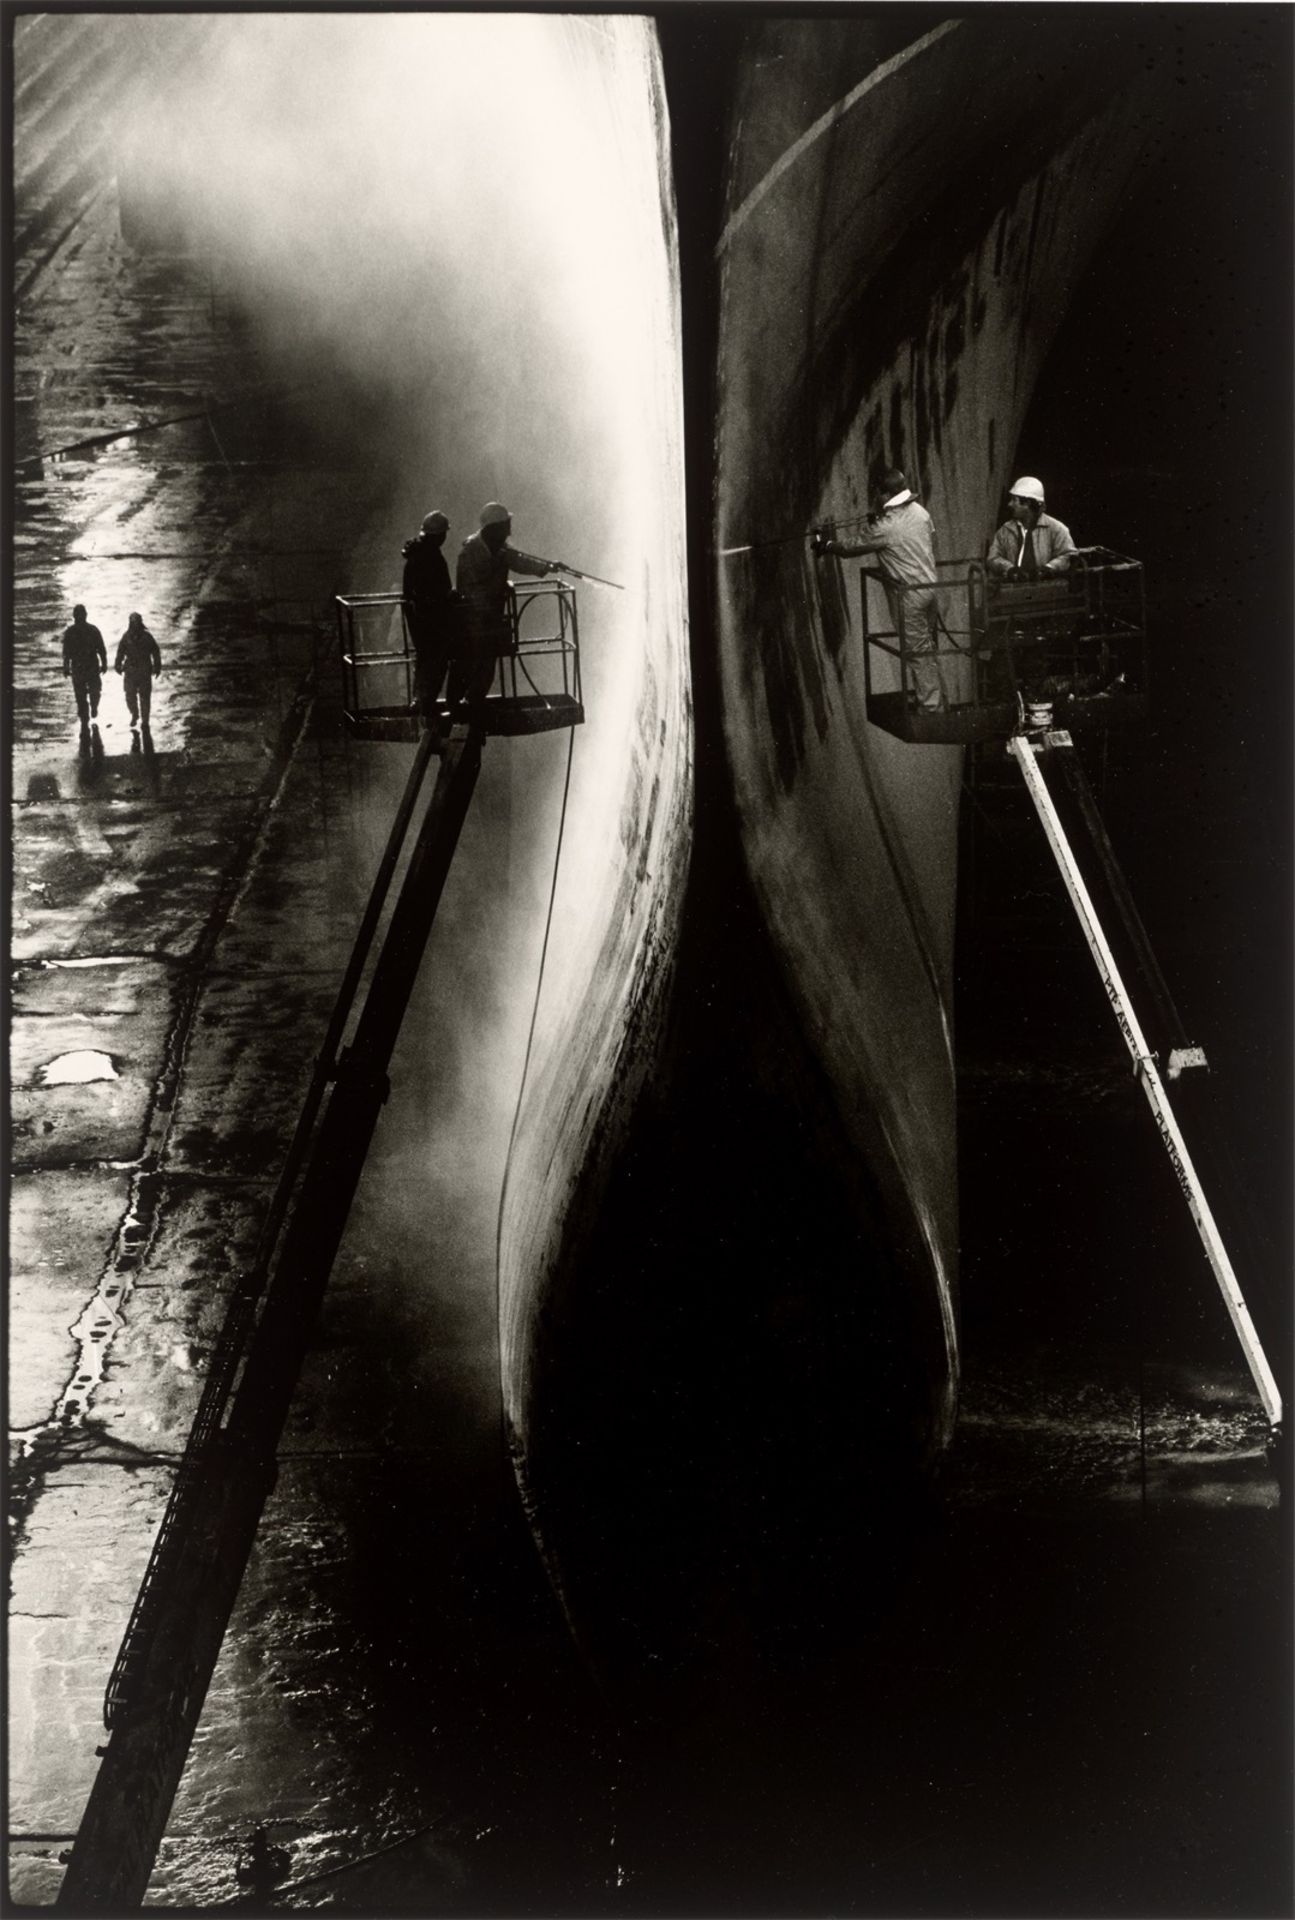 Bruce Davidson. Southampton. The 'Queen Elizabeth 2' in Dry dock for Maintenance. 1996